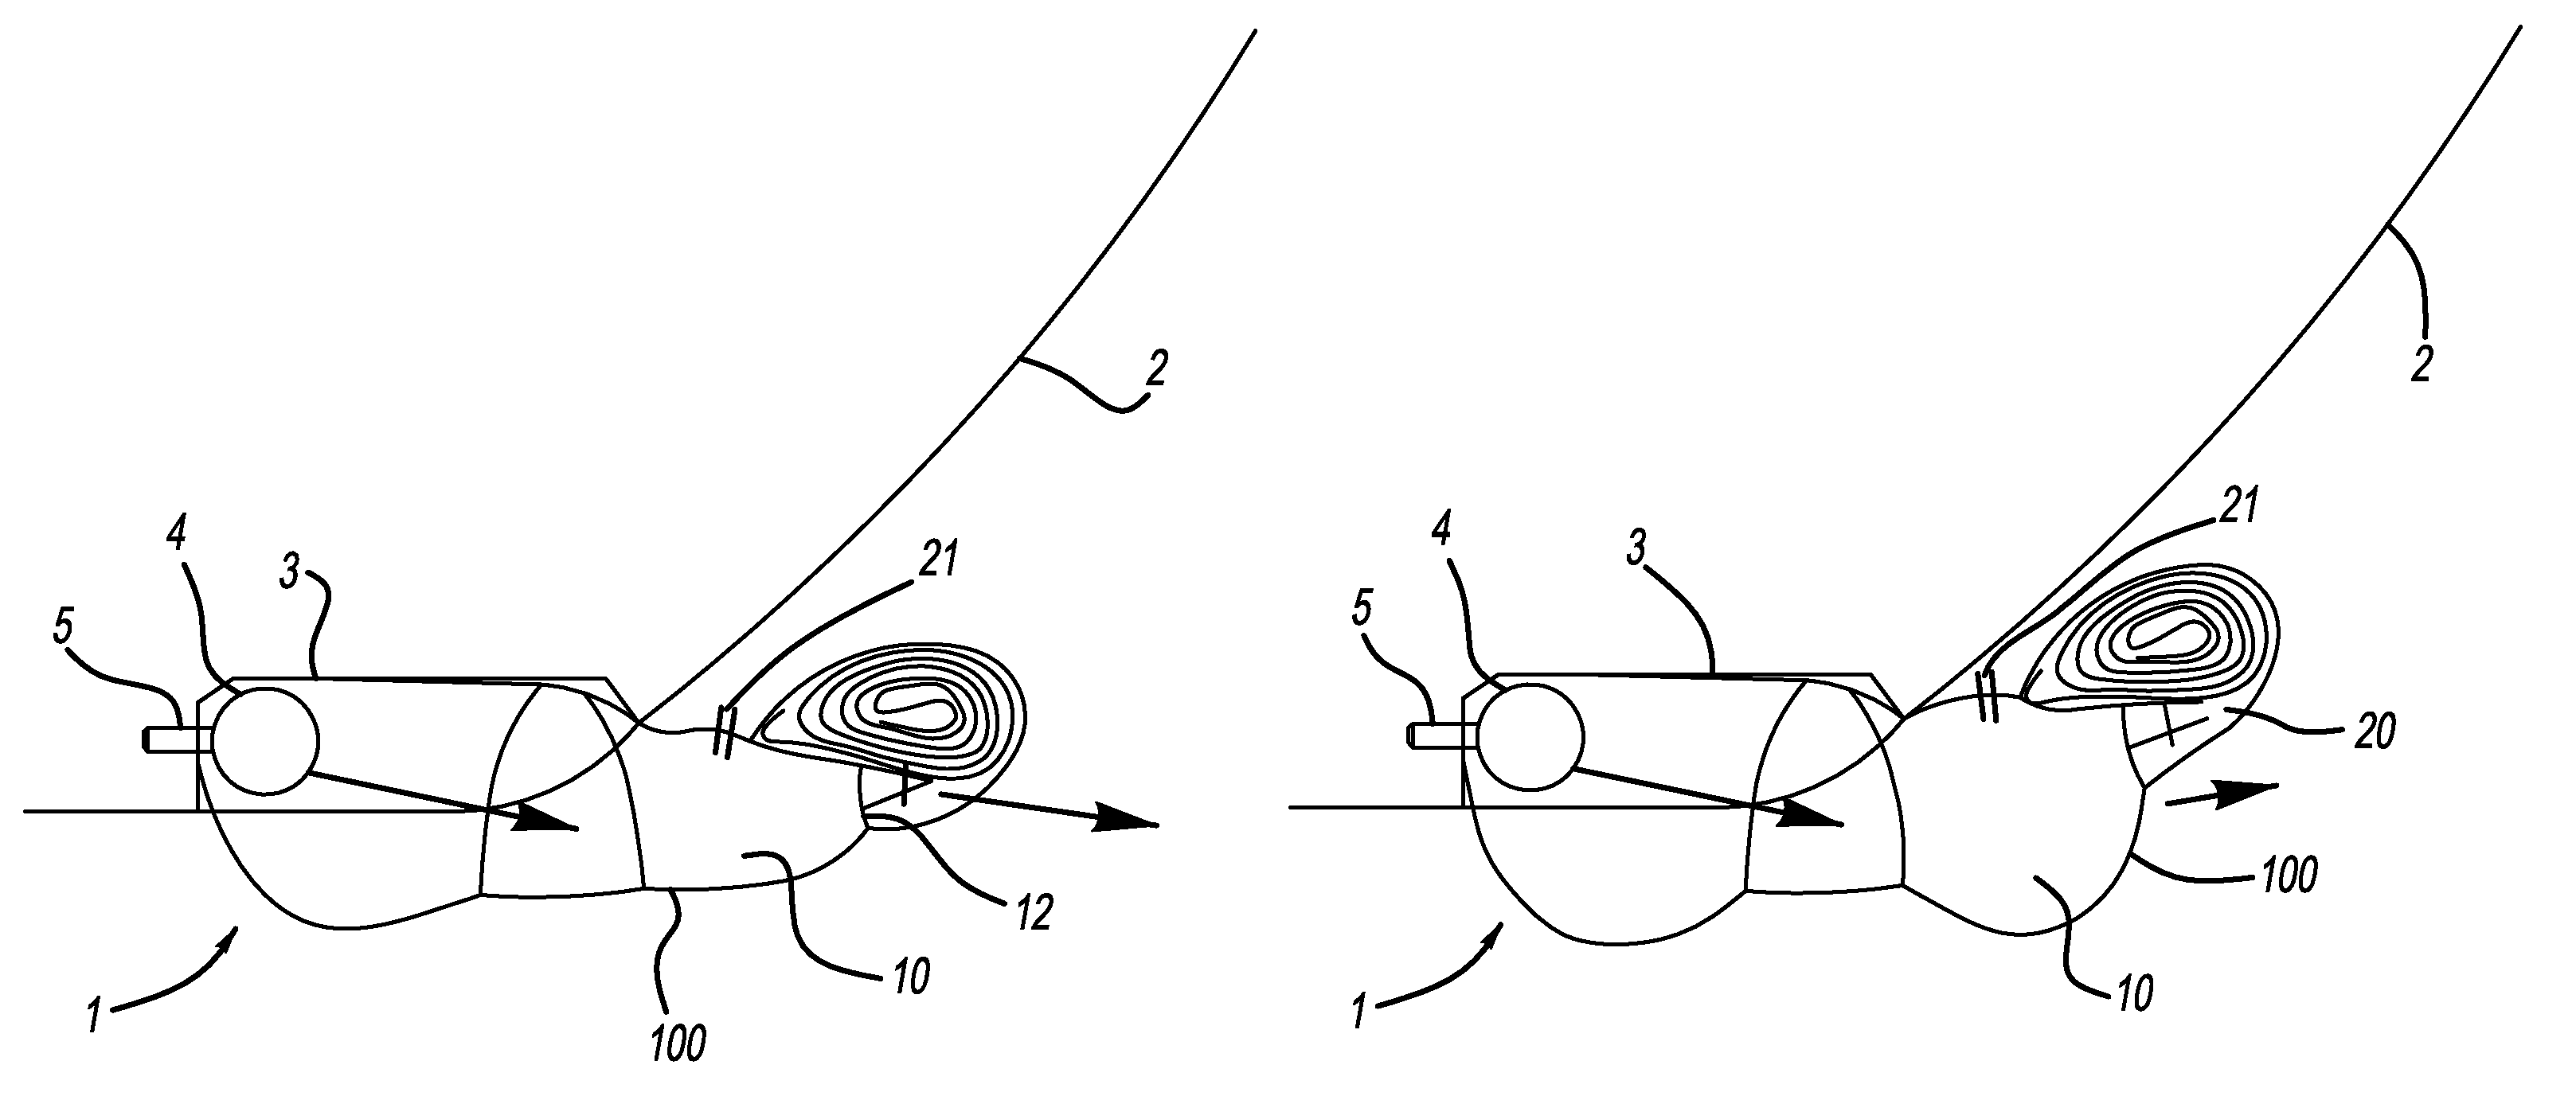 Apparatus for protecting the knee region of a vehicle occupant